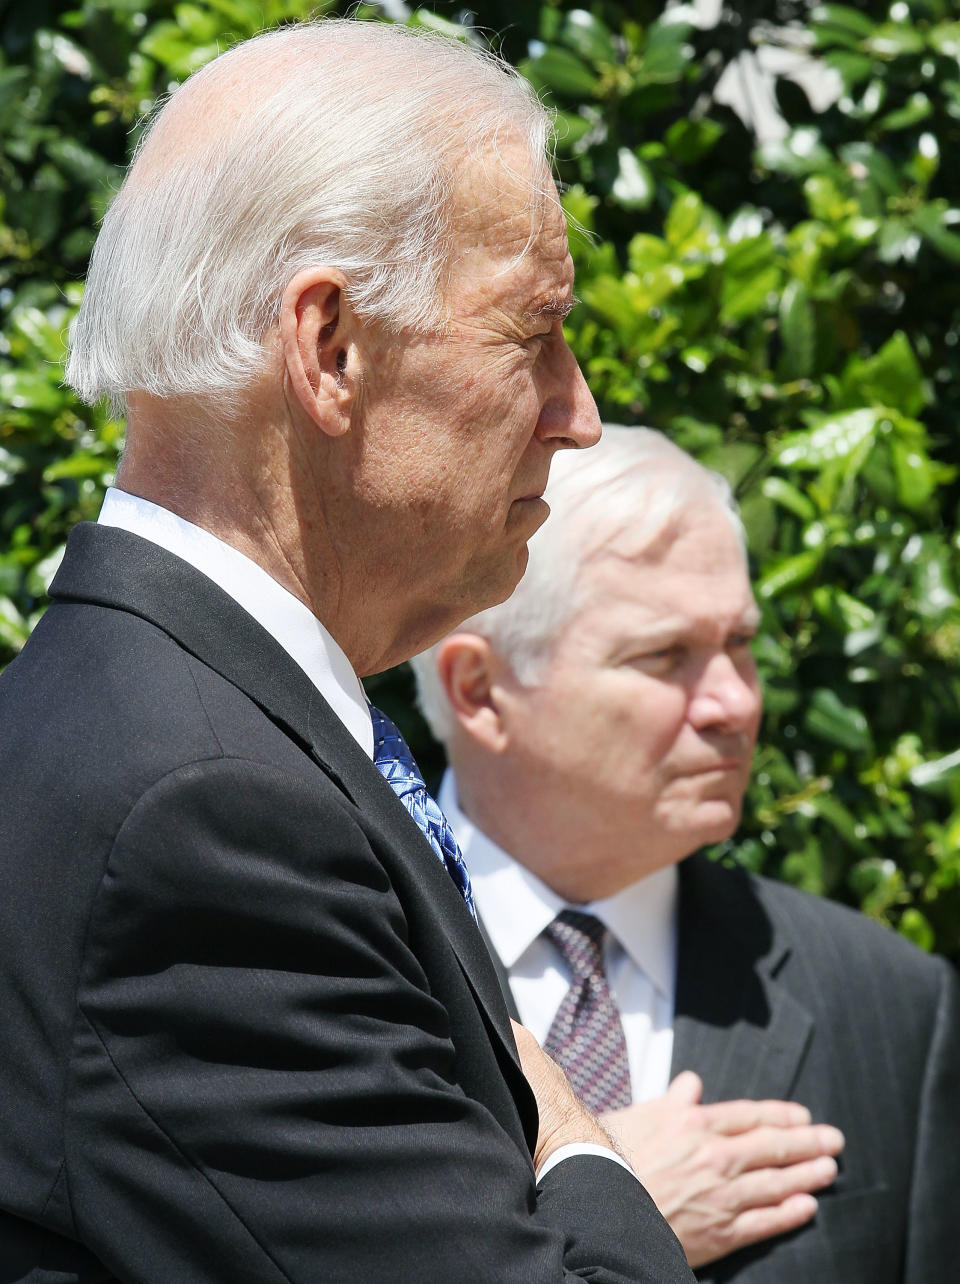 Biden Attends Wreath-Laying Ceremony At Pentagon Memorial For 9/11 Victims